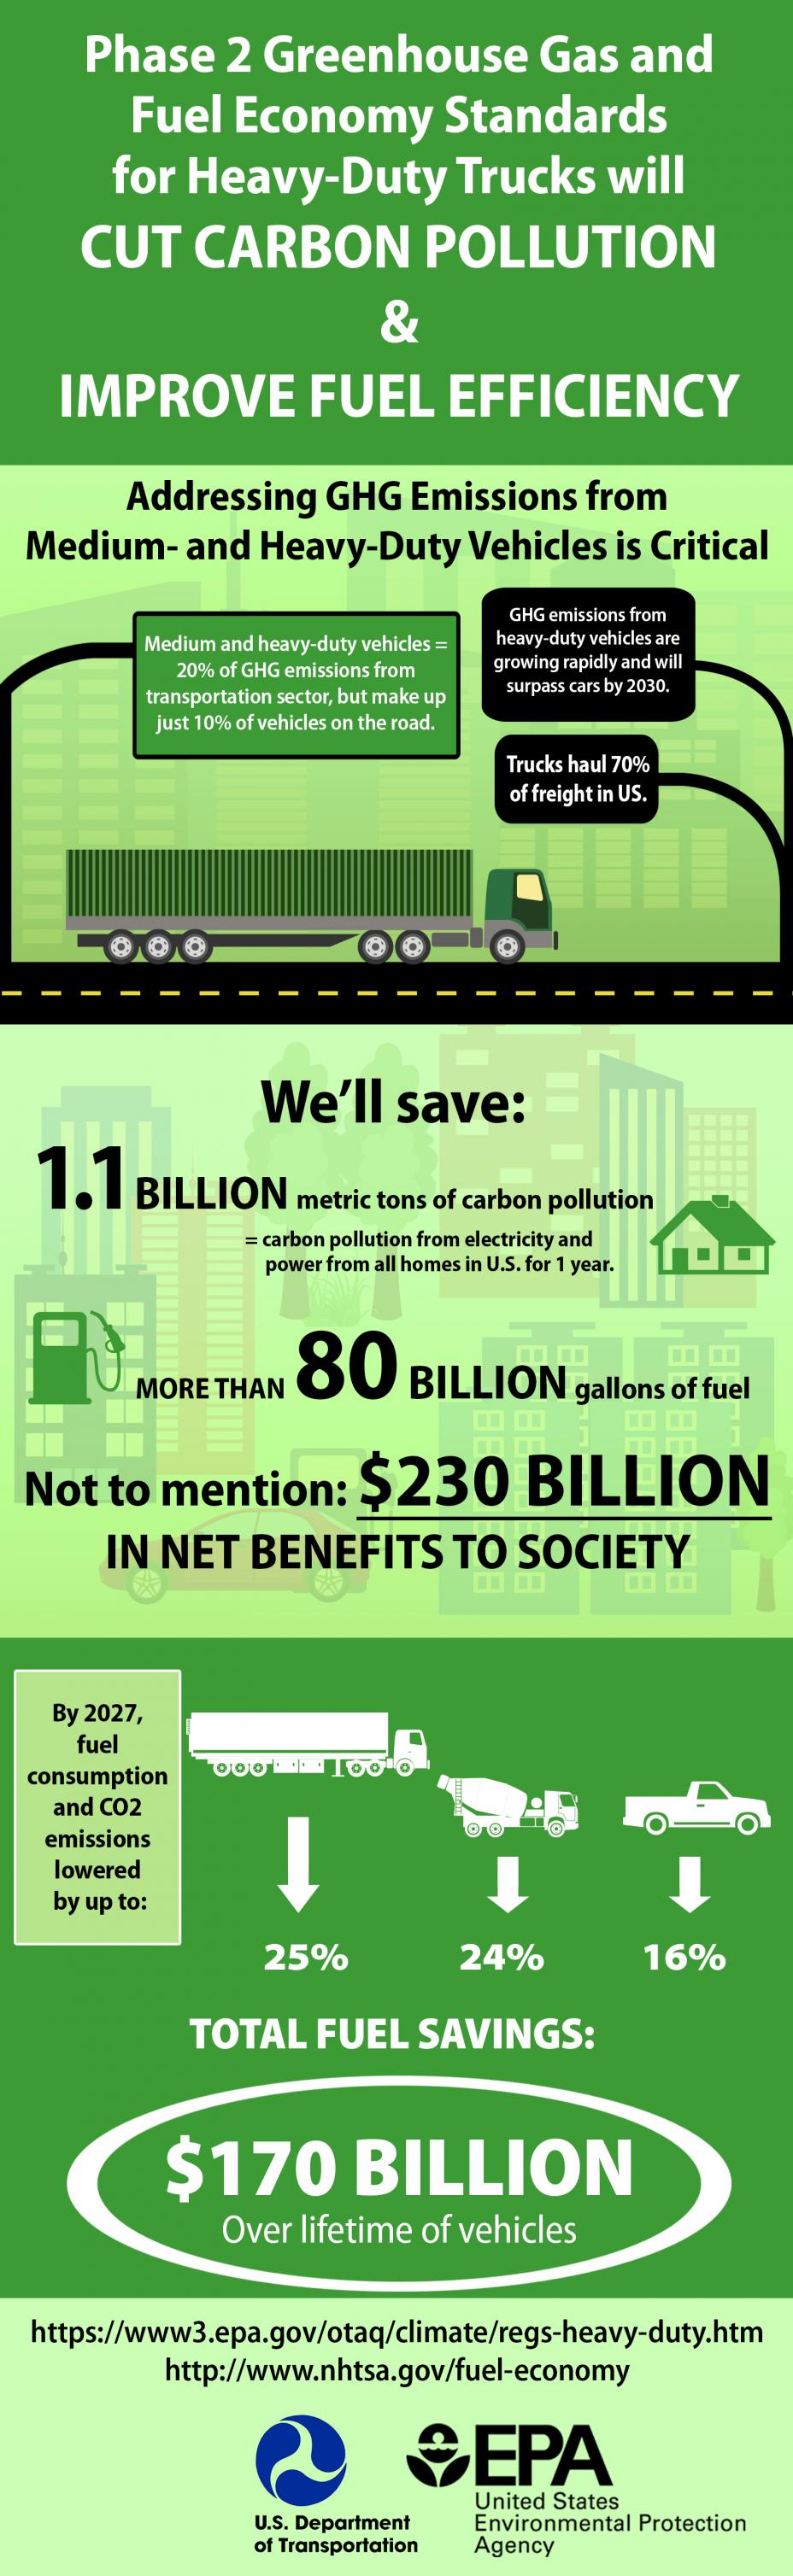 Phase 2 greenhouse gas and fuel economy standards for heavy-duty trucks will cut carbon pollution and improve fuel efficiency.